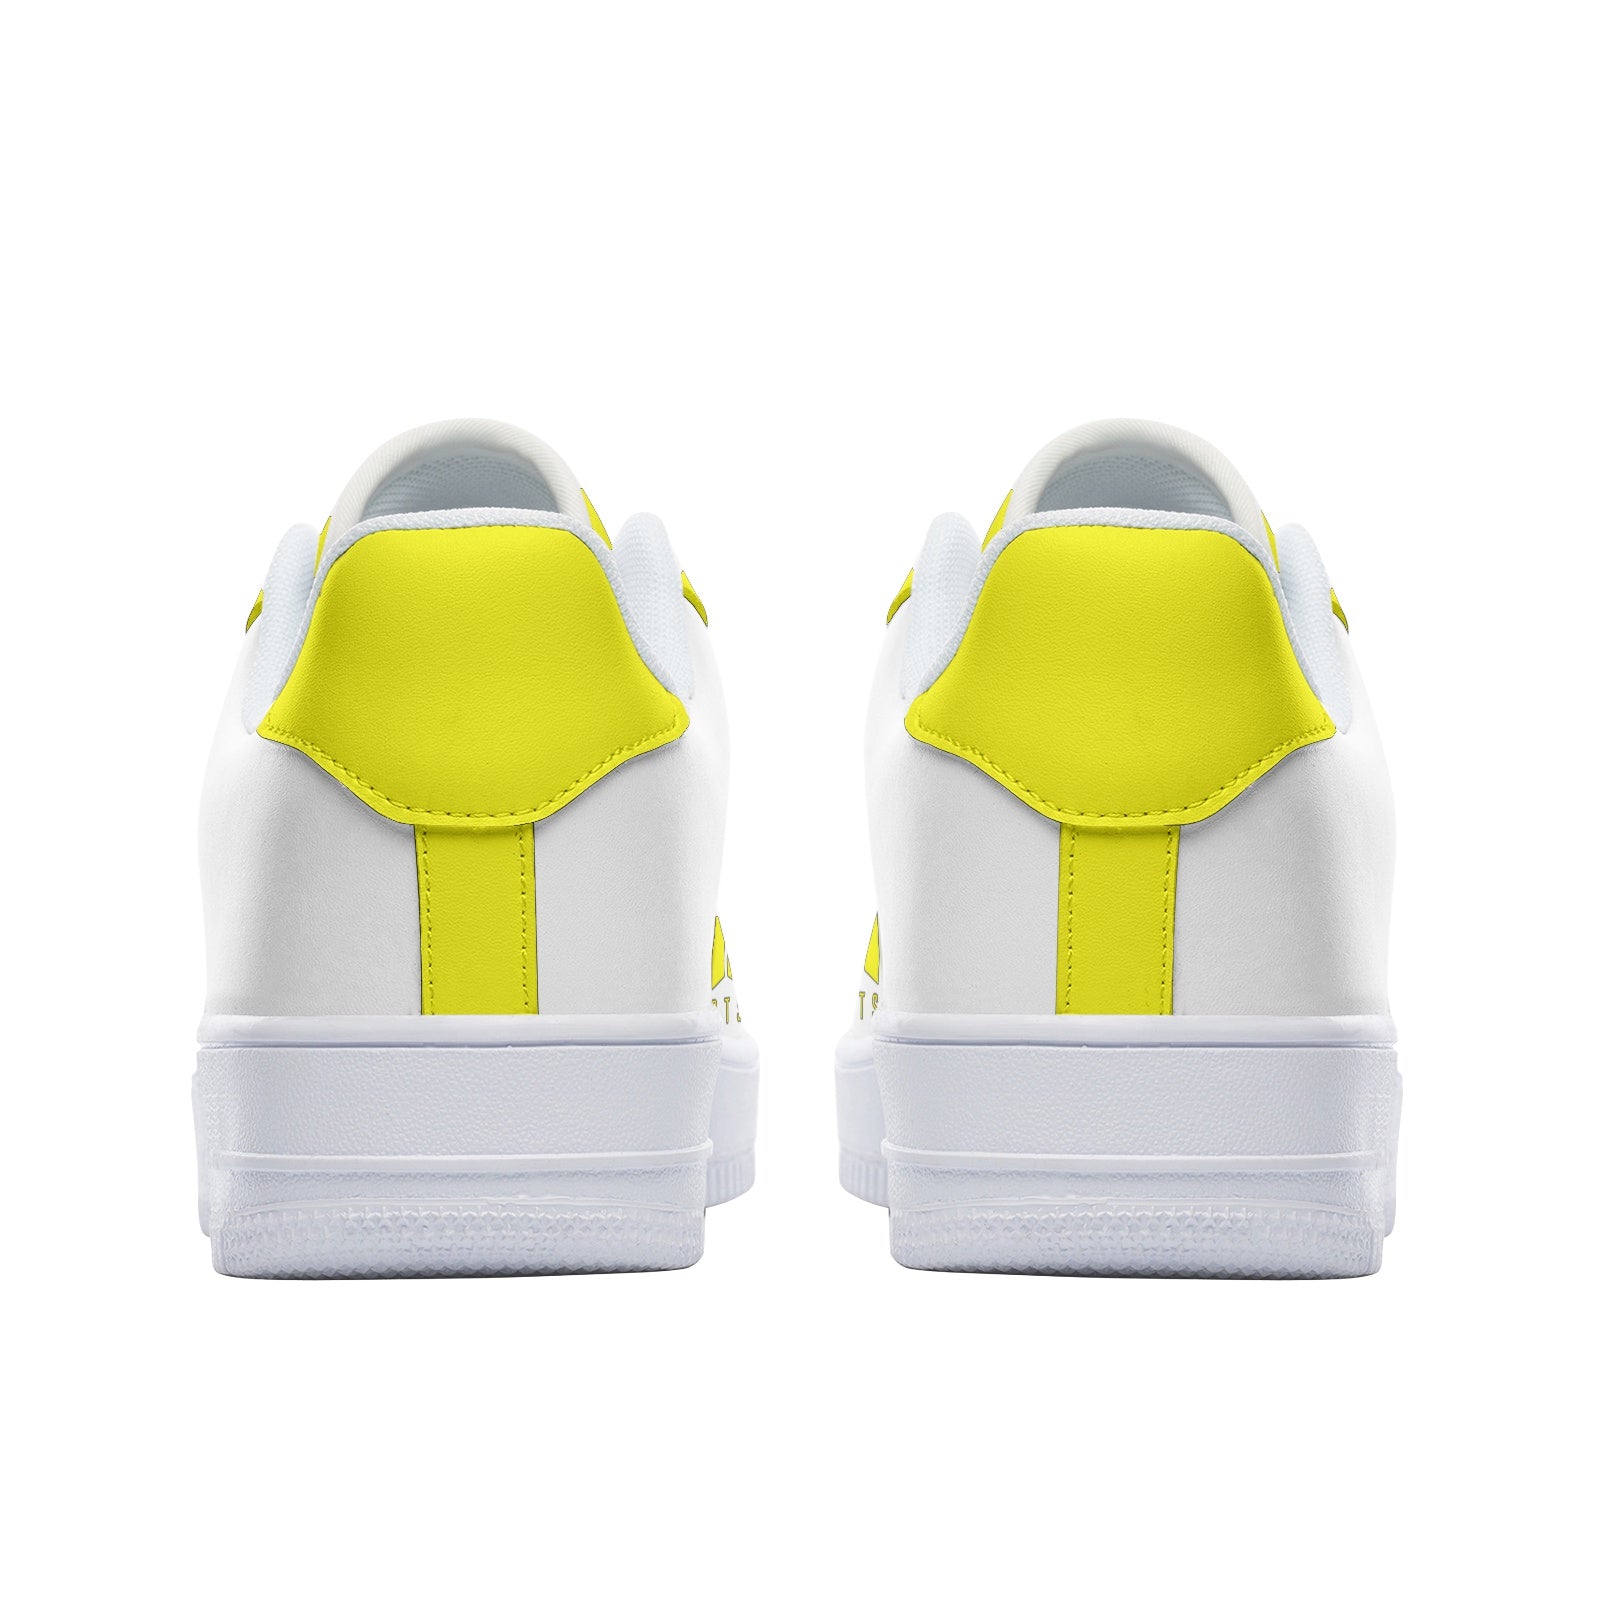 BTS Logo Unisex Low Top Leather Sneakers Yellow - SD-style-shop